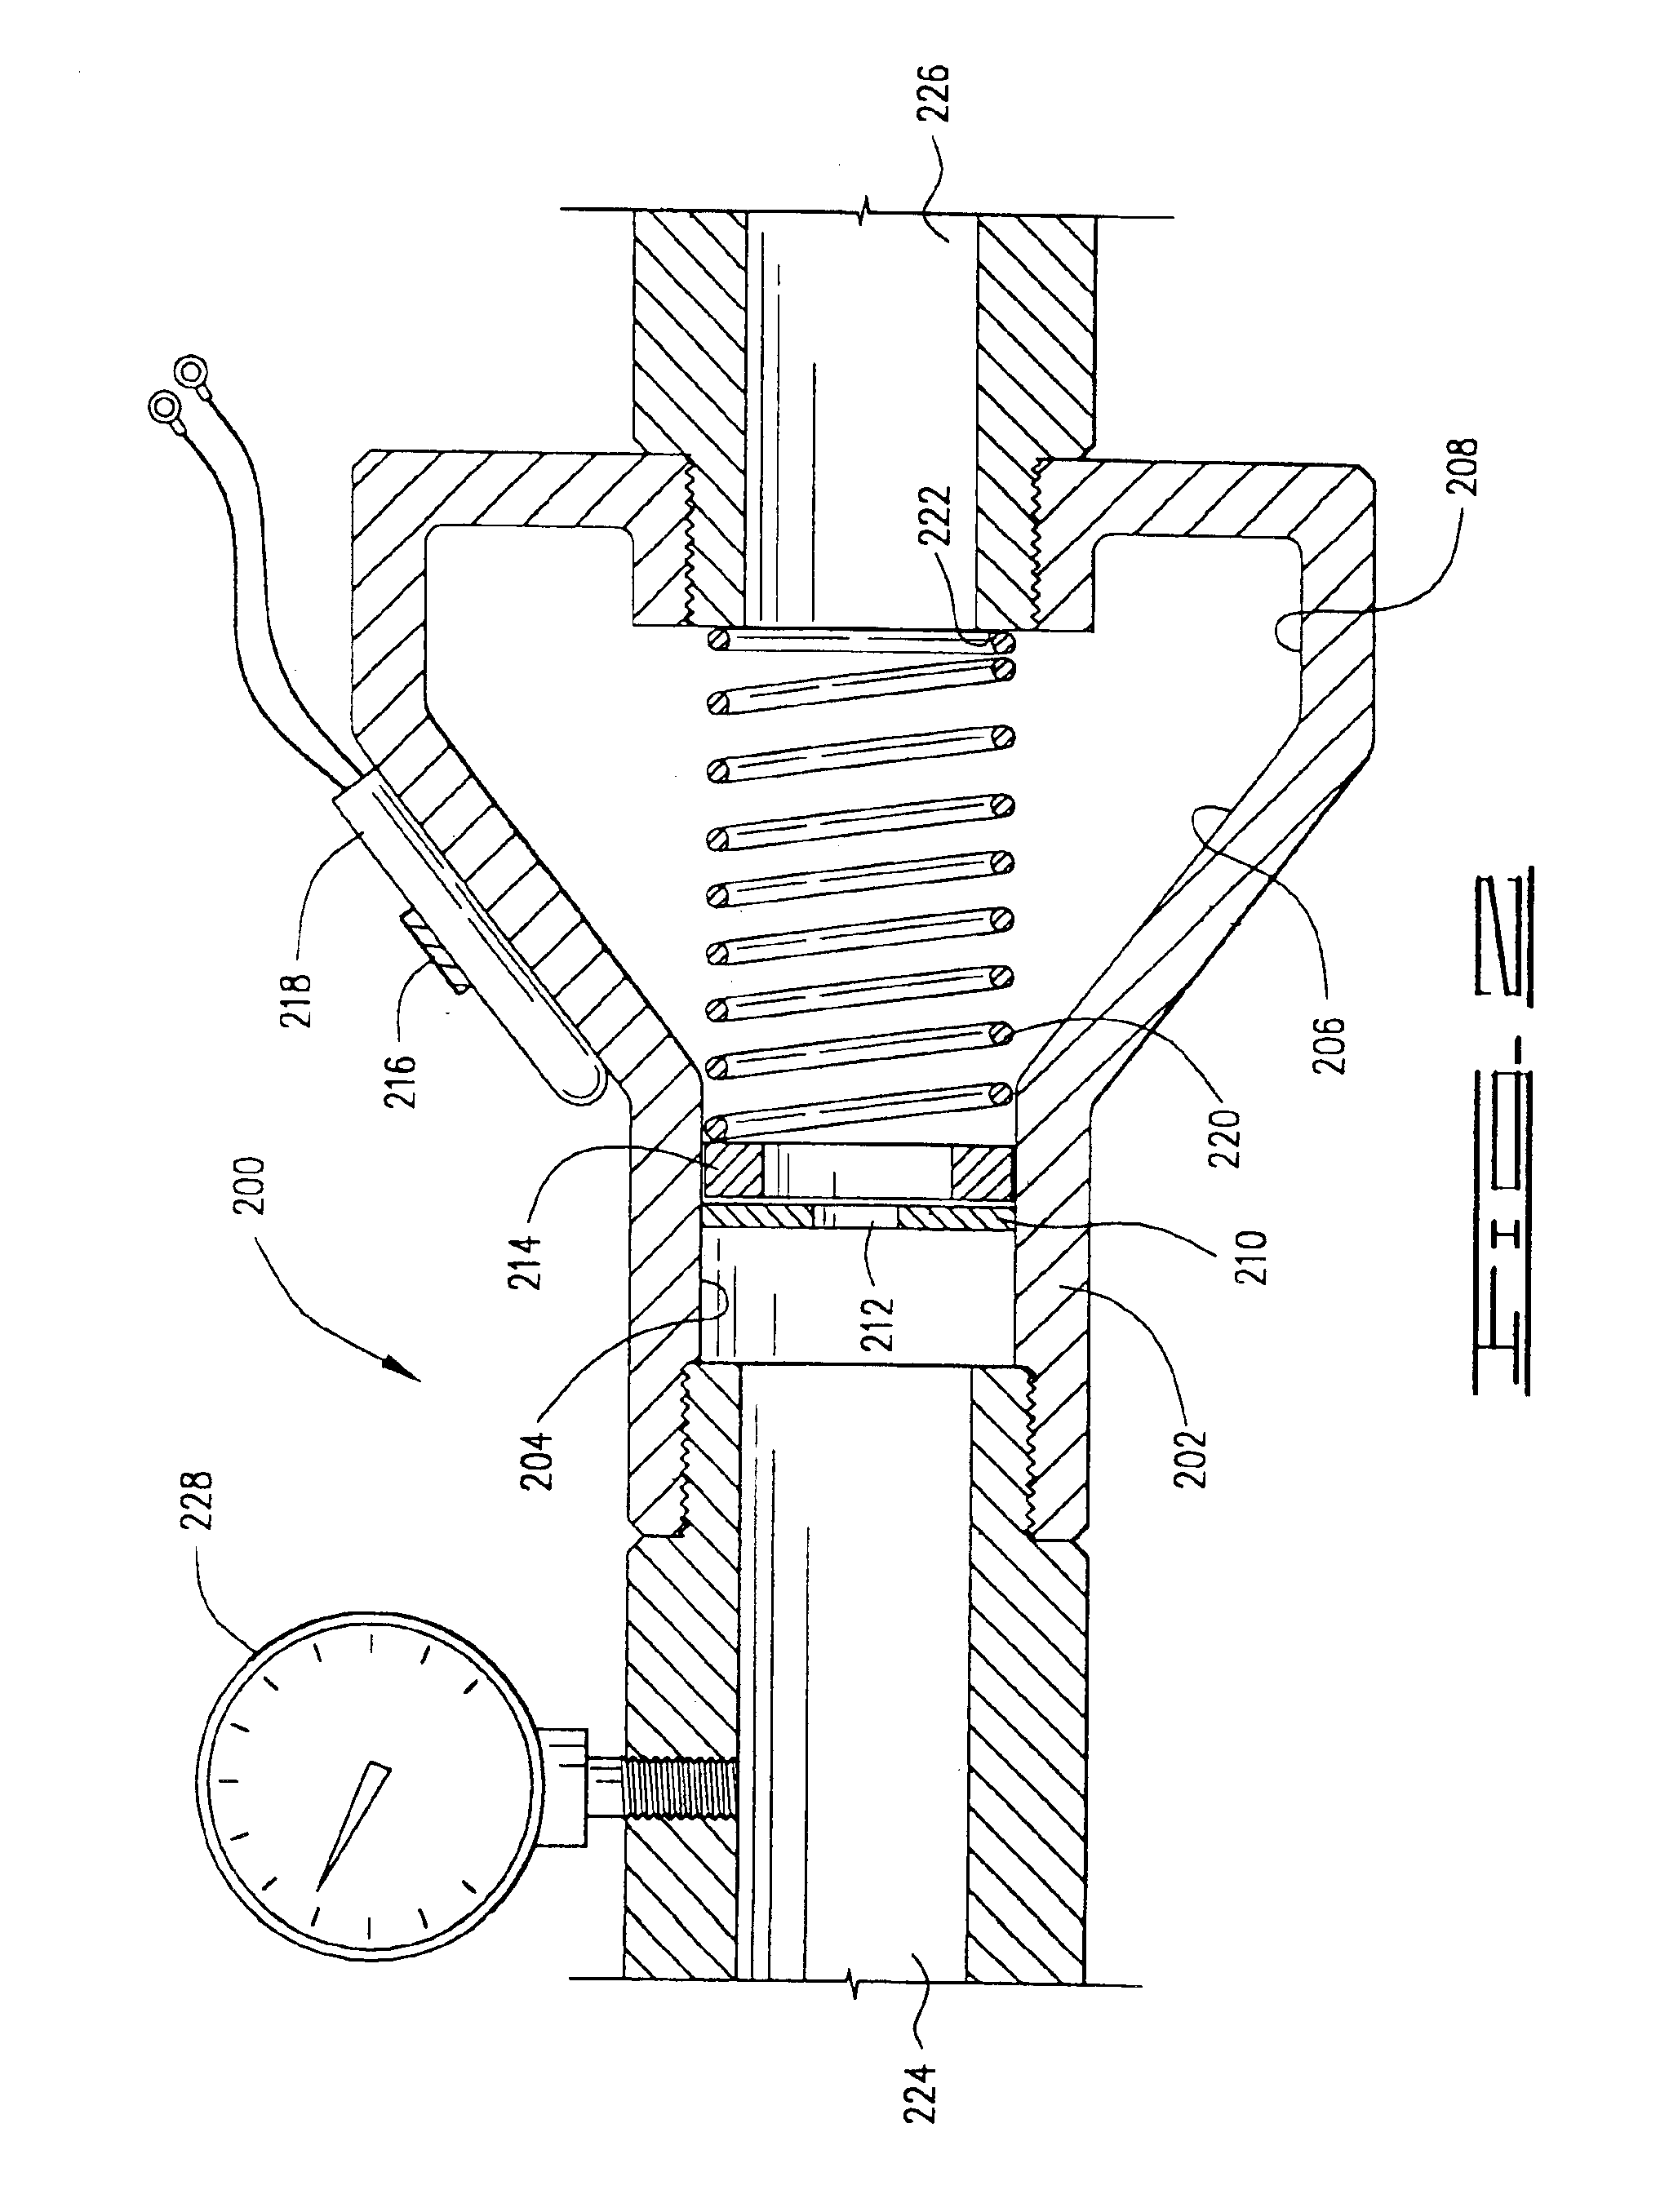 Apparatus for flow detection, measurement and control and method for use of same